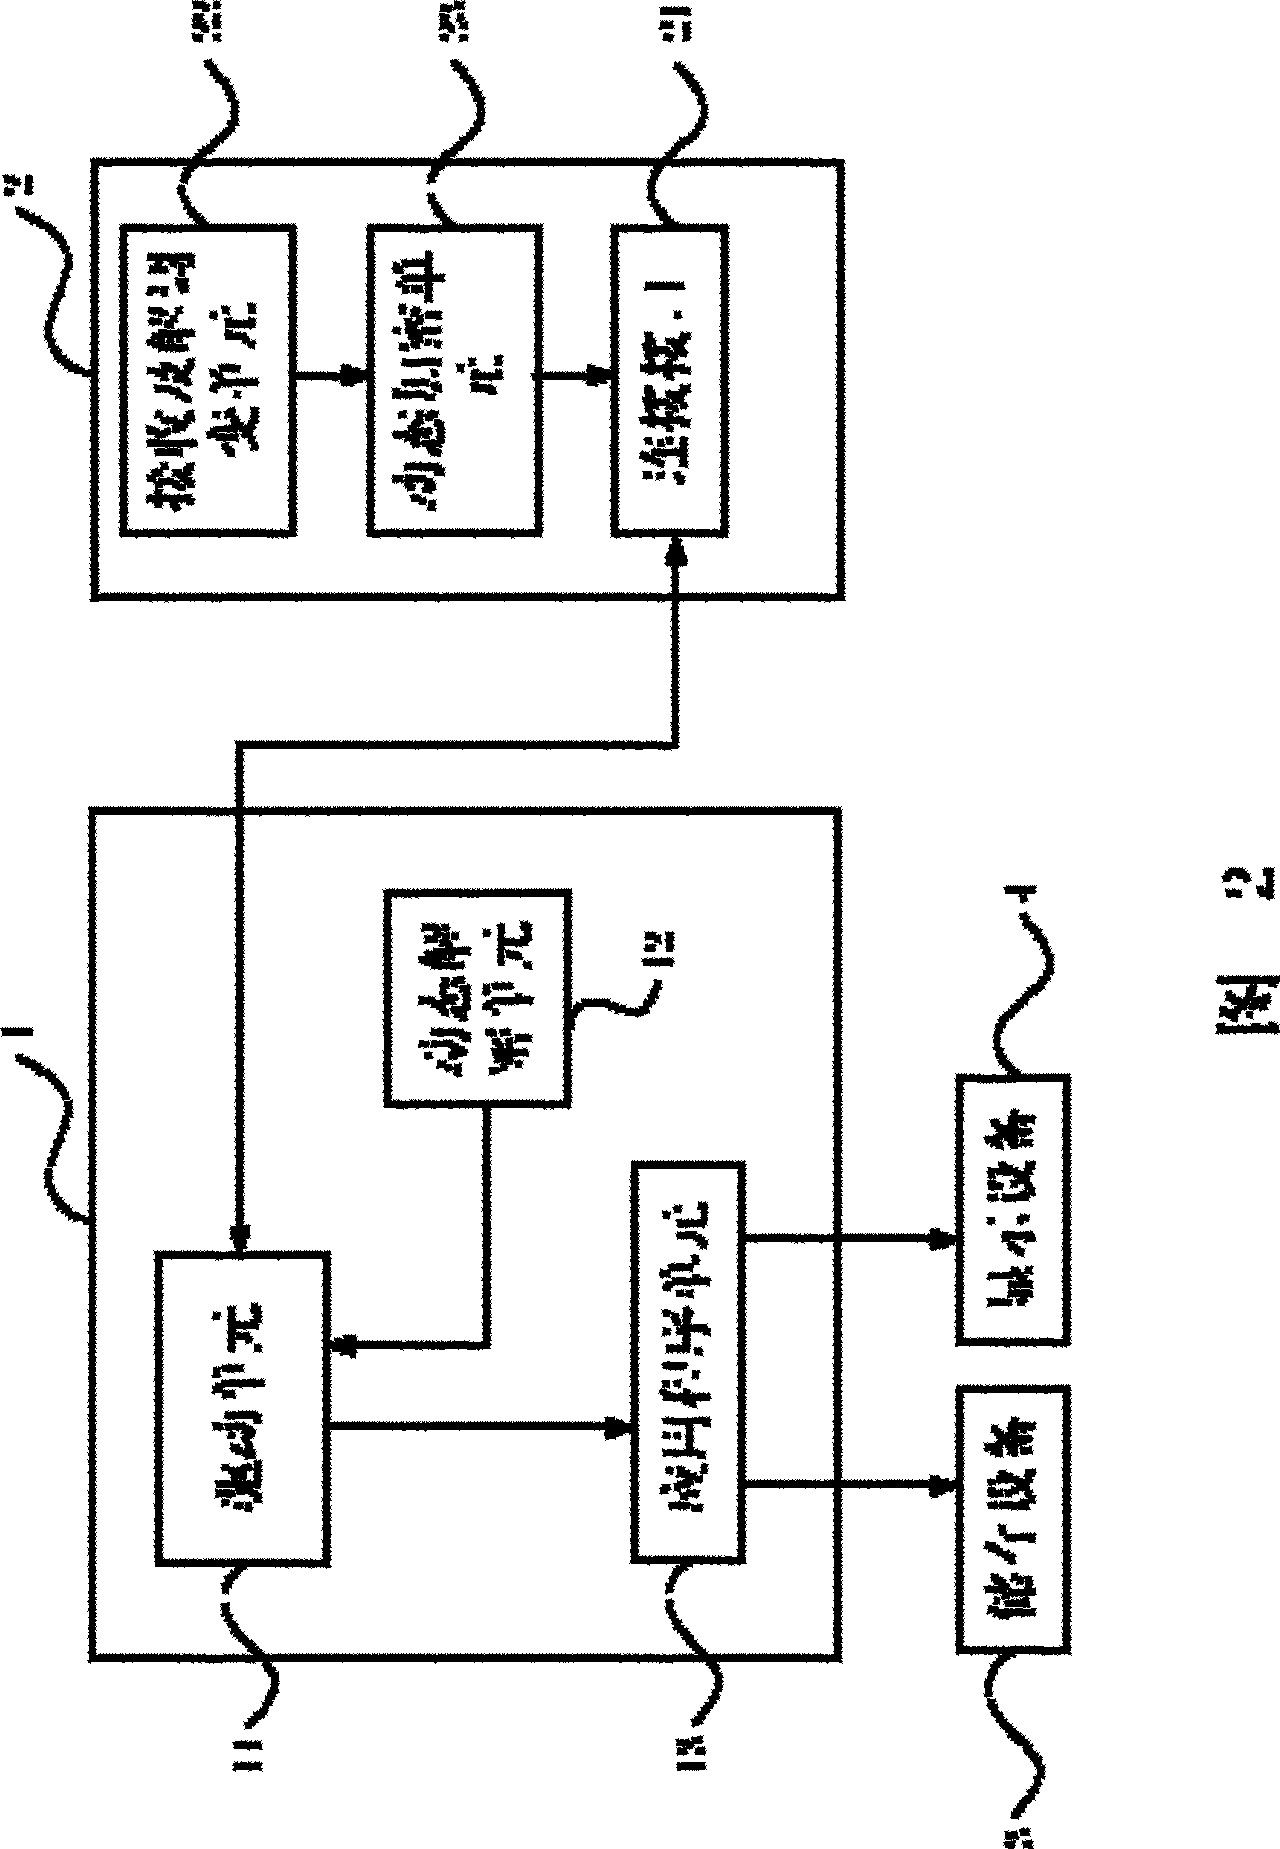 Encipher apparatus for image and sound transmission